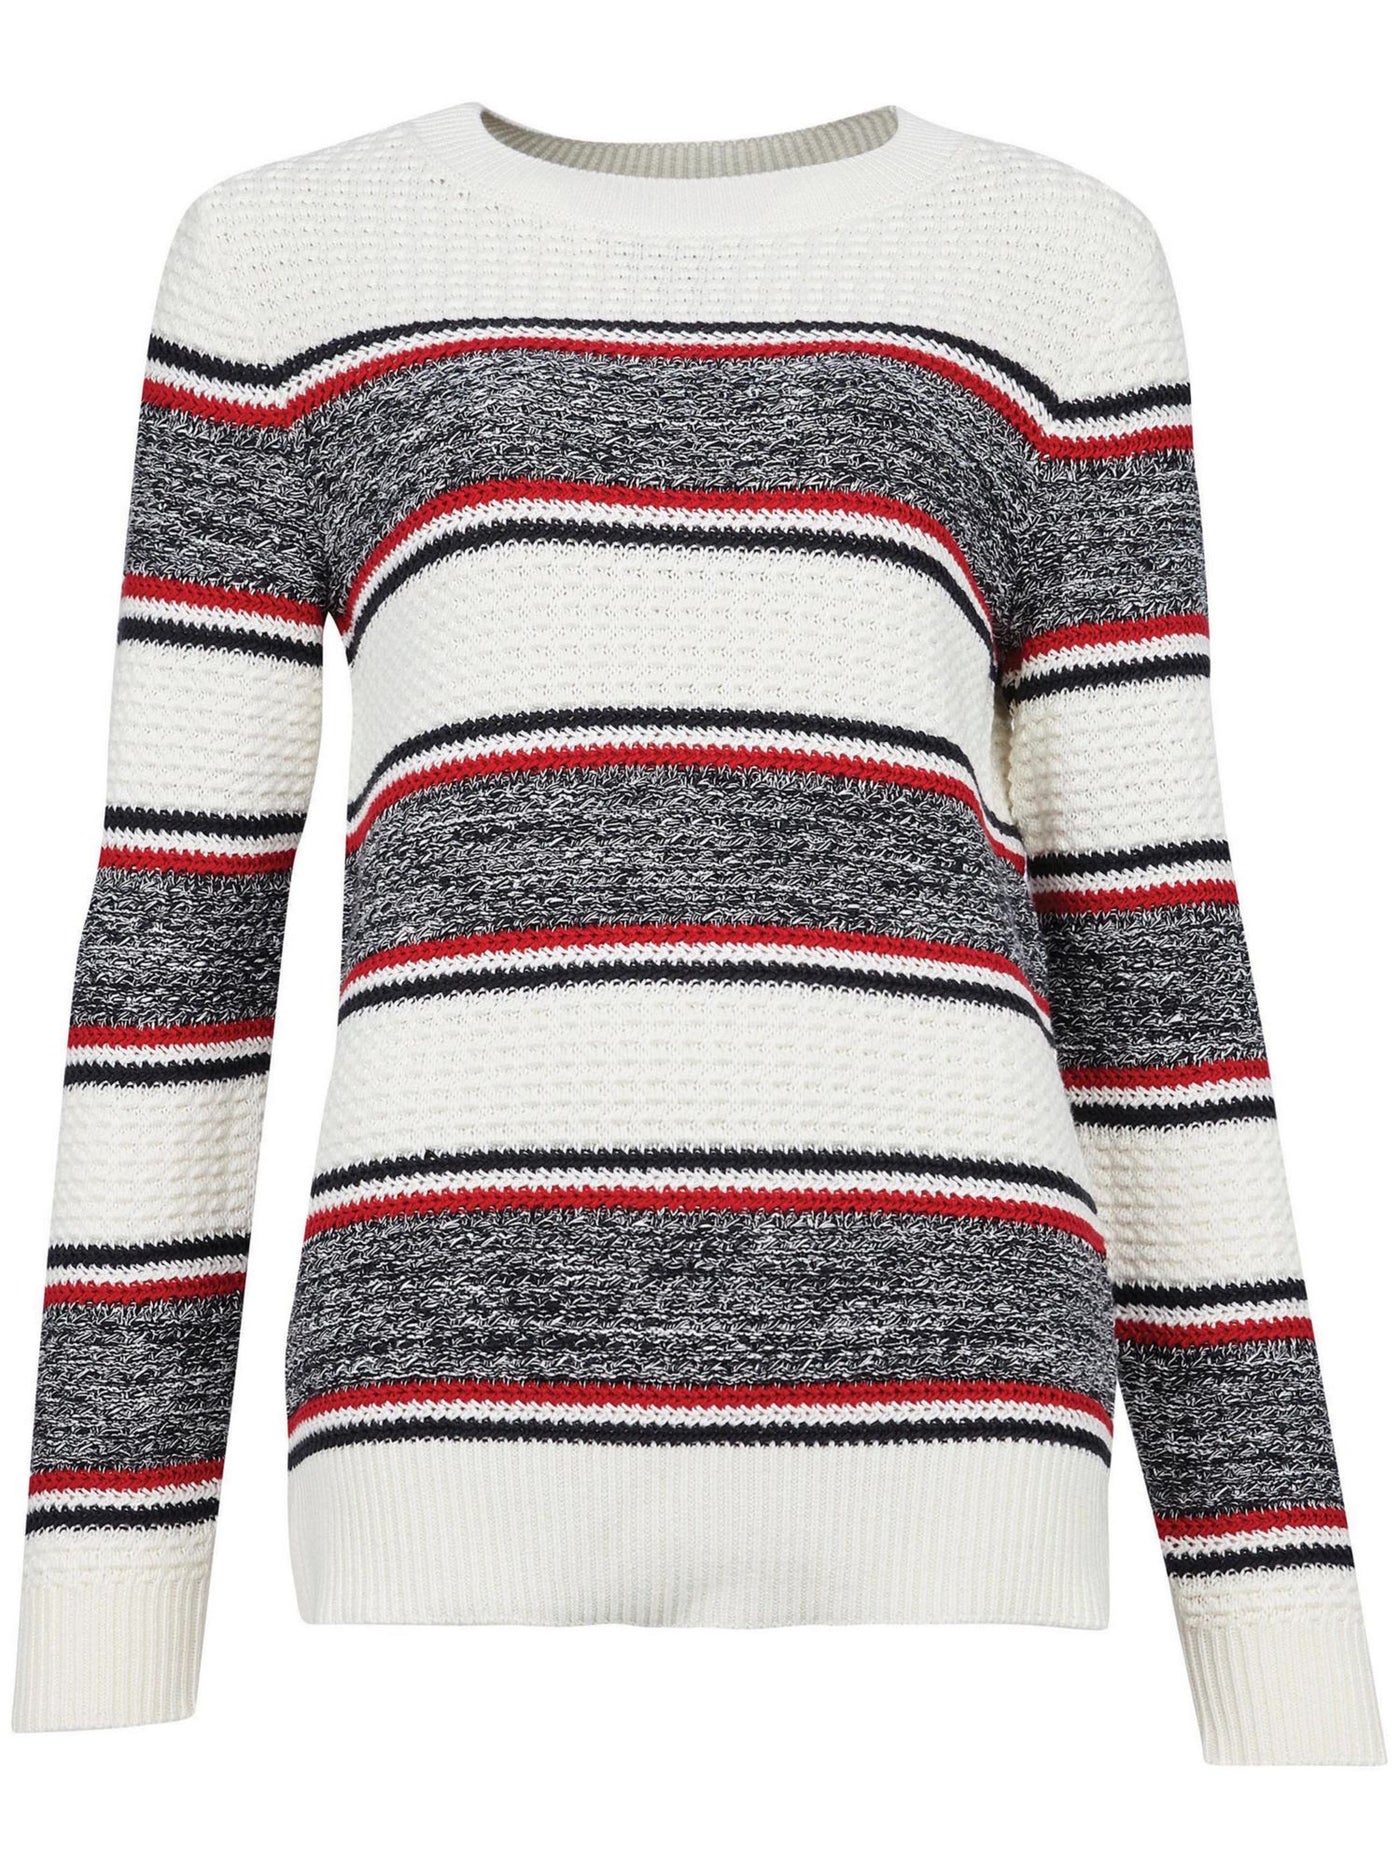 BARBOUR Womens White Textured Ribbed Neck Cuffs Hem Striped Long Sleeve Crew Neck Wear To Work Sweater 12